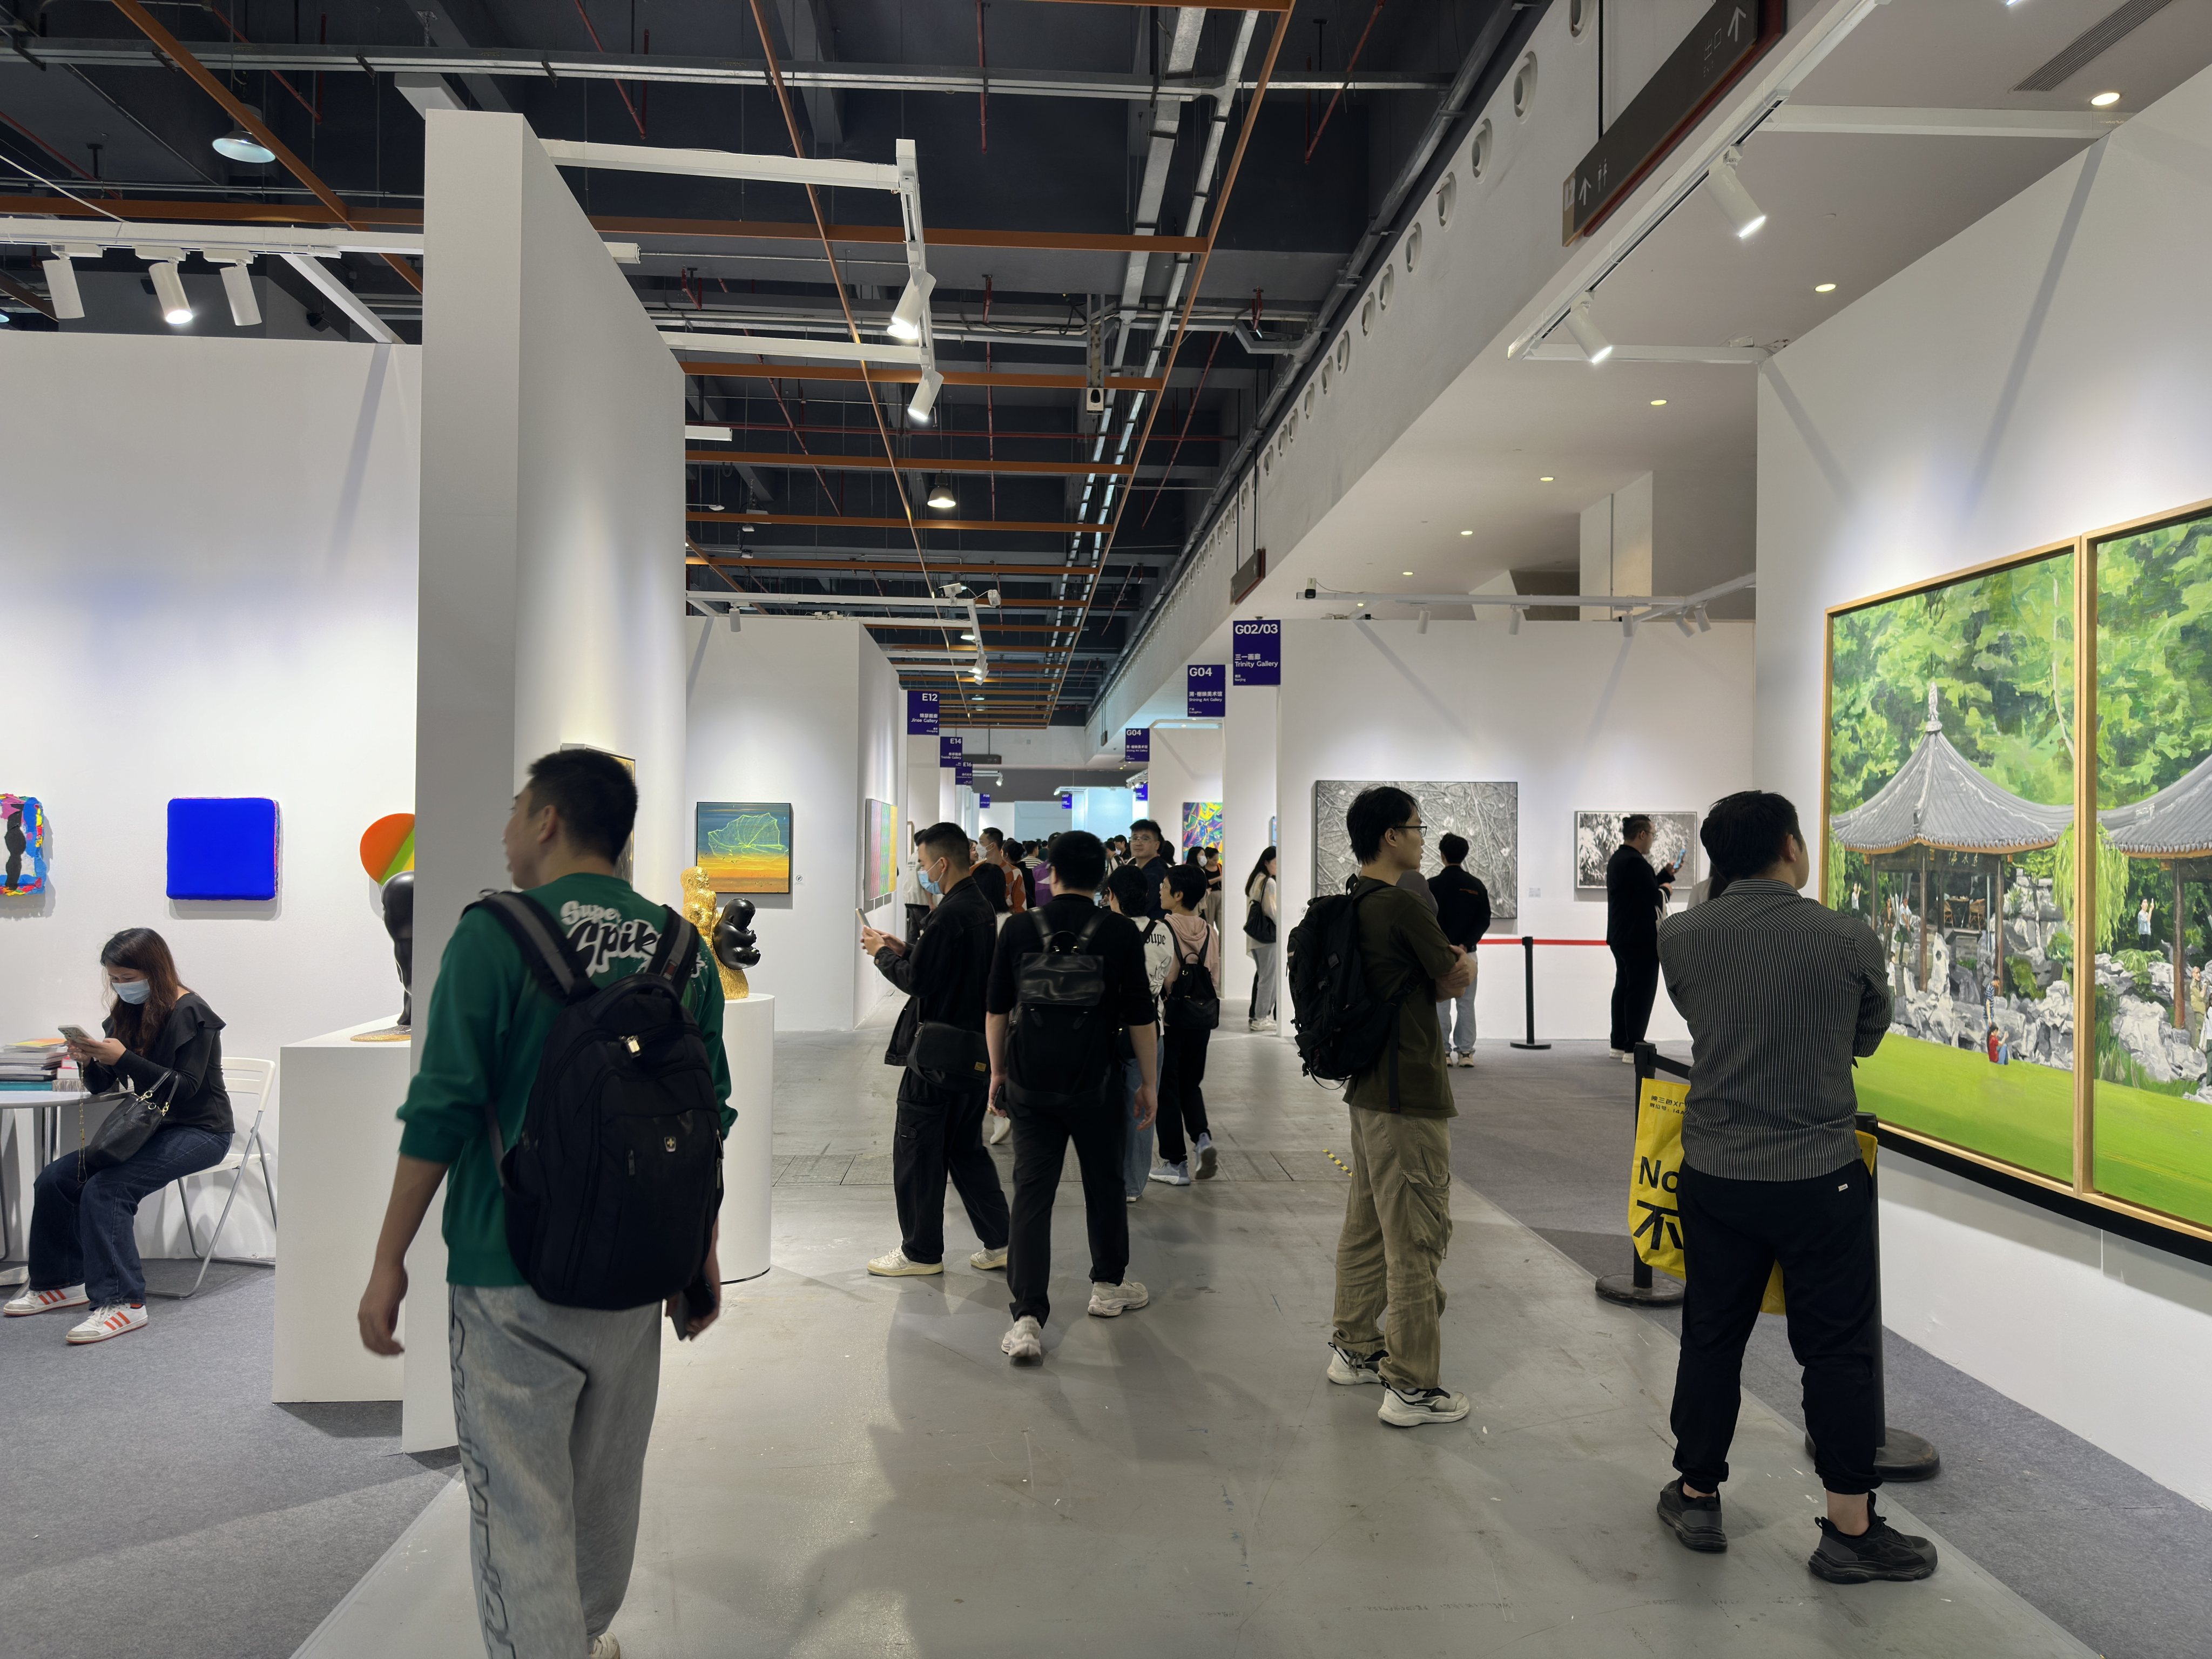 The first in-person staging of the Moordn Art Fair in Guangzhou, from December 8-11, was well attended, but the slow sales there suggest the market for contemporary art in the Chinese city is still developing. Photo: Cheung Hon-hang